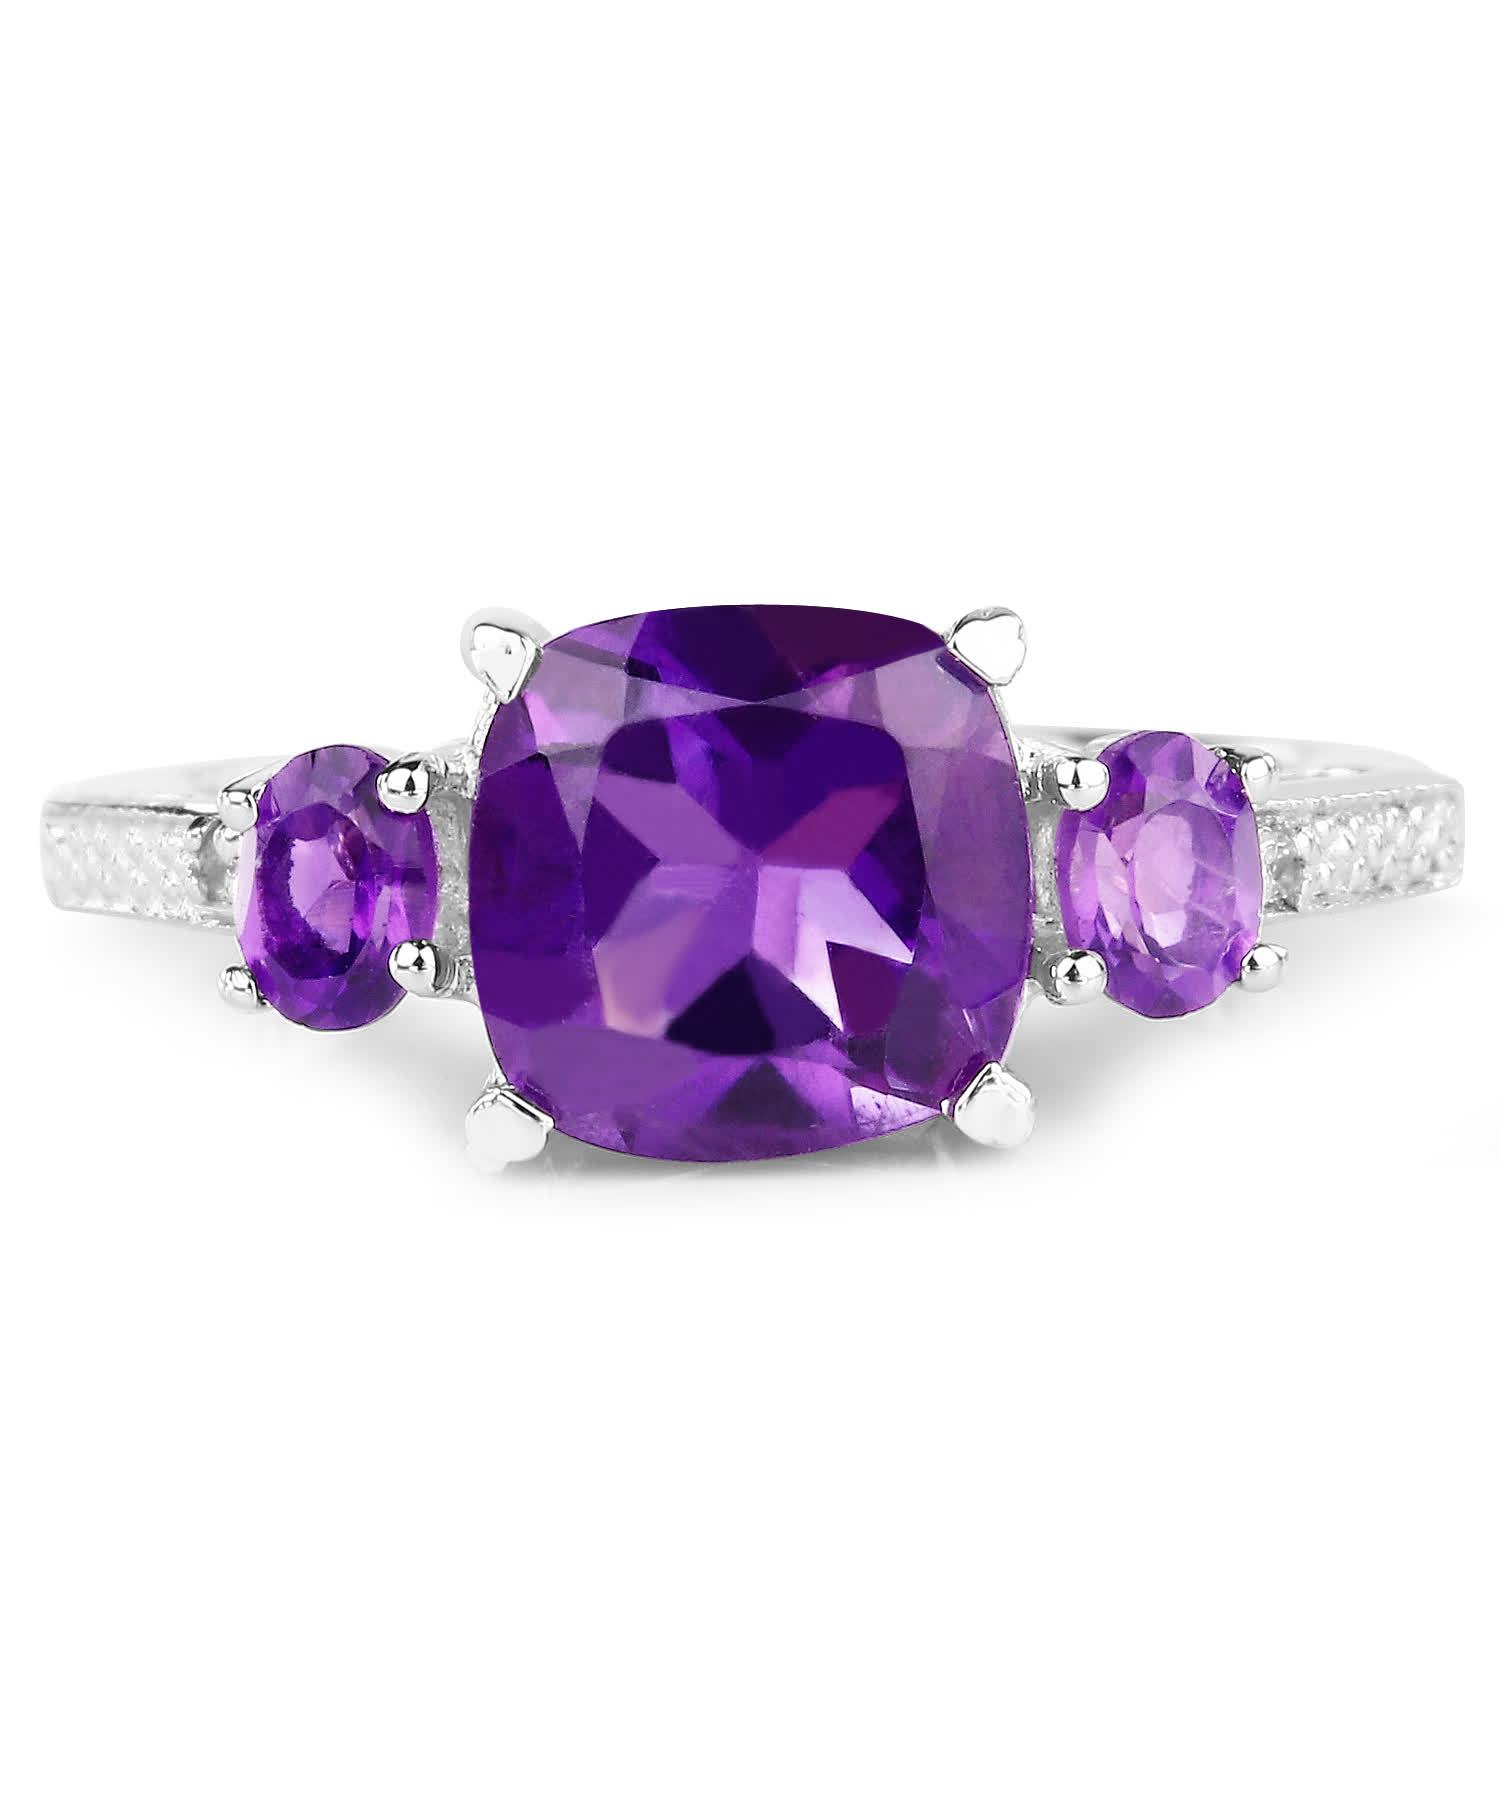 2.38ctw Natural Amethyst and Topaz Rhodium Plated 925 Sterling Silver Three-Stone Ring View 3